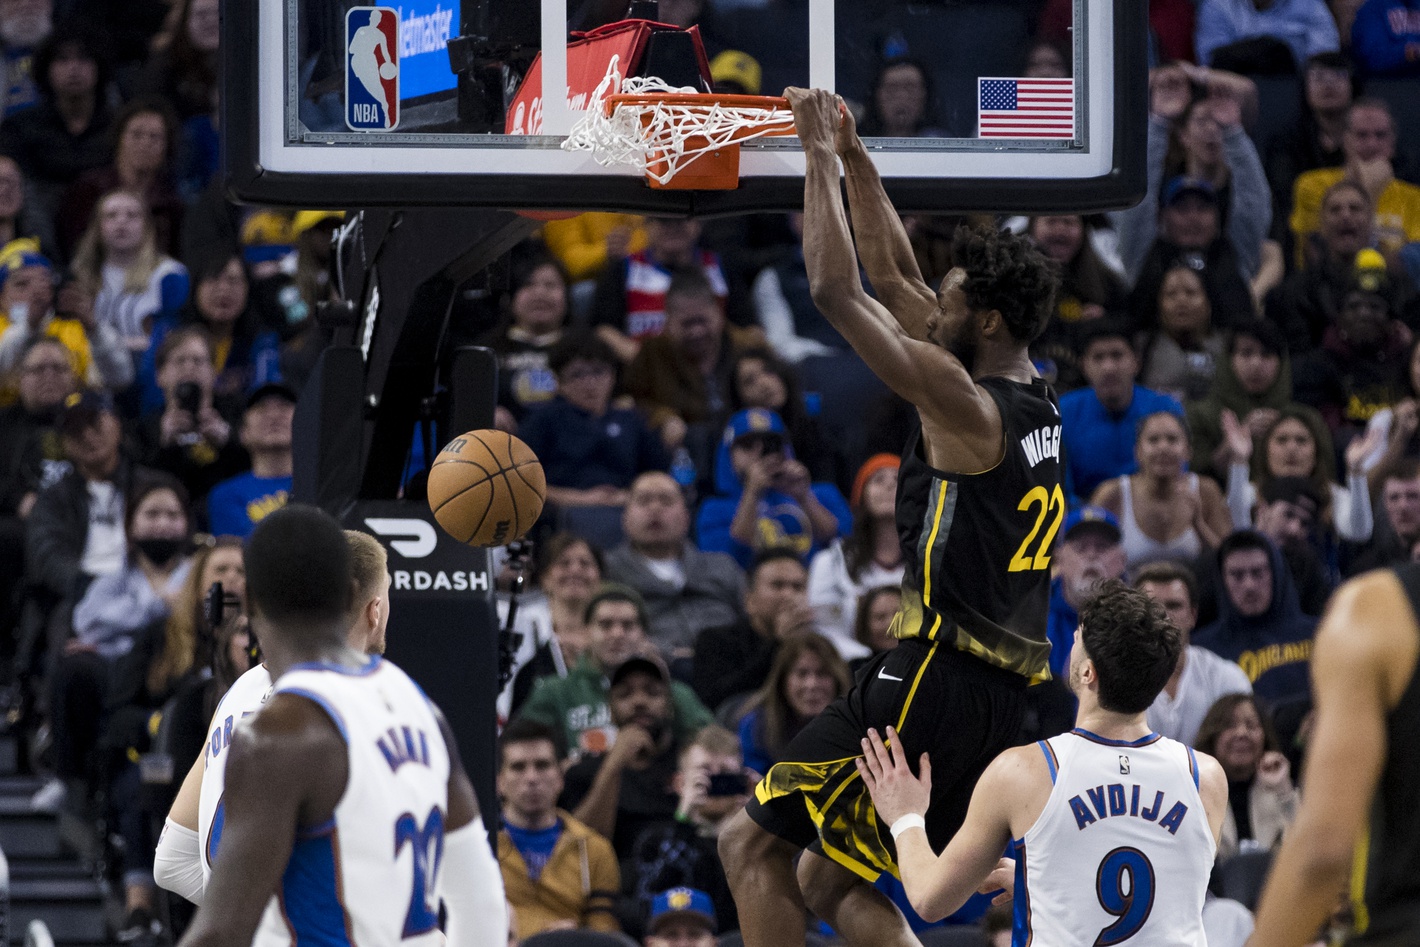 Golden State Warriors forward Andrew Wiggins (22) dunks the ball against the Washington Wizards during the second half at Chase Center. Mandatory Credit: John Hefti-USA TODAY Sports